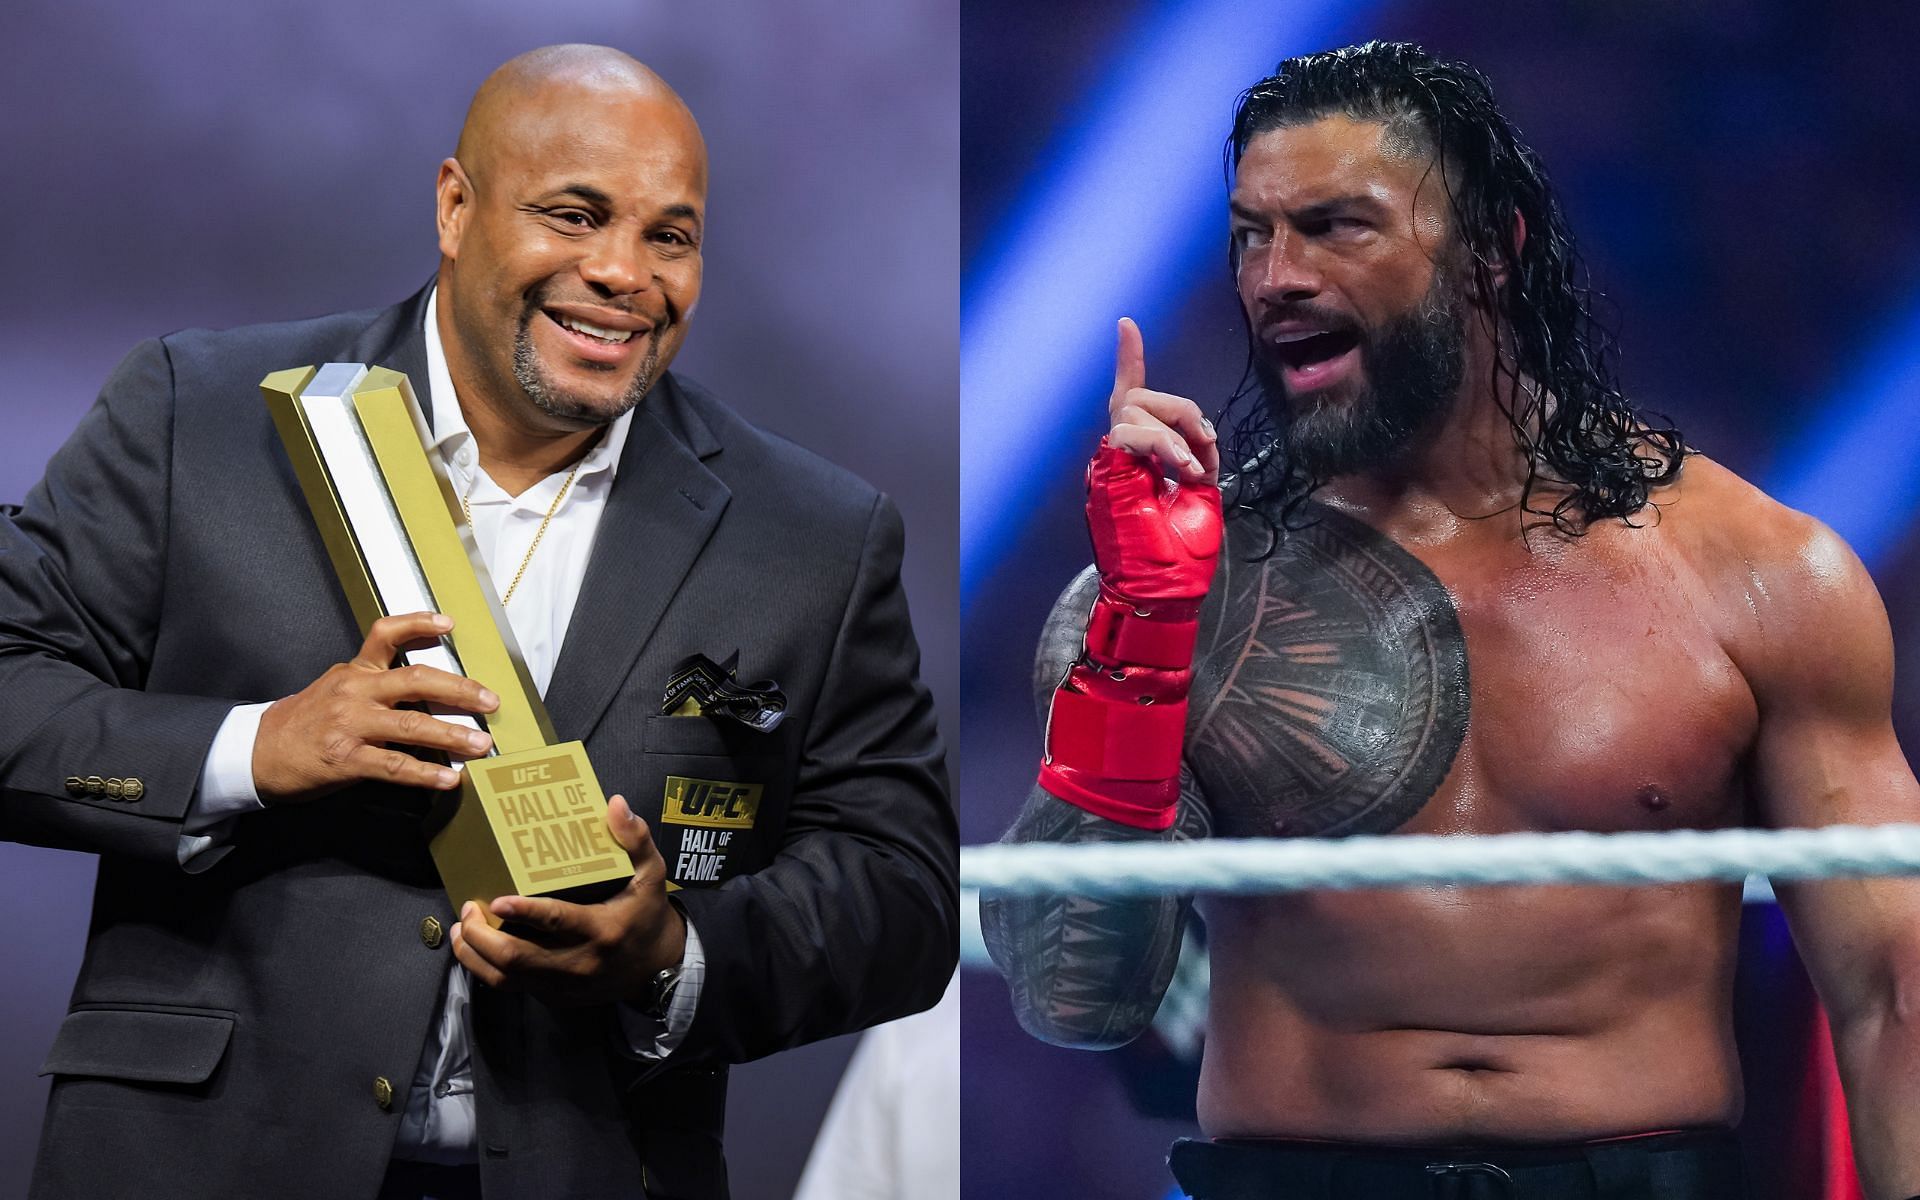 Daniel Cormier (left) fired back after Roman Reigns mocked him for his commentary role (right) [Images courtesy: Getty Images]